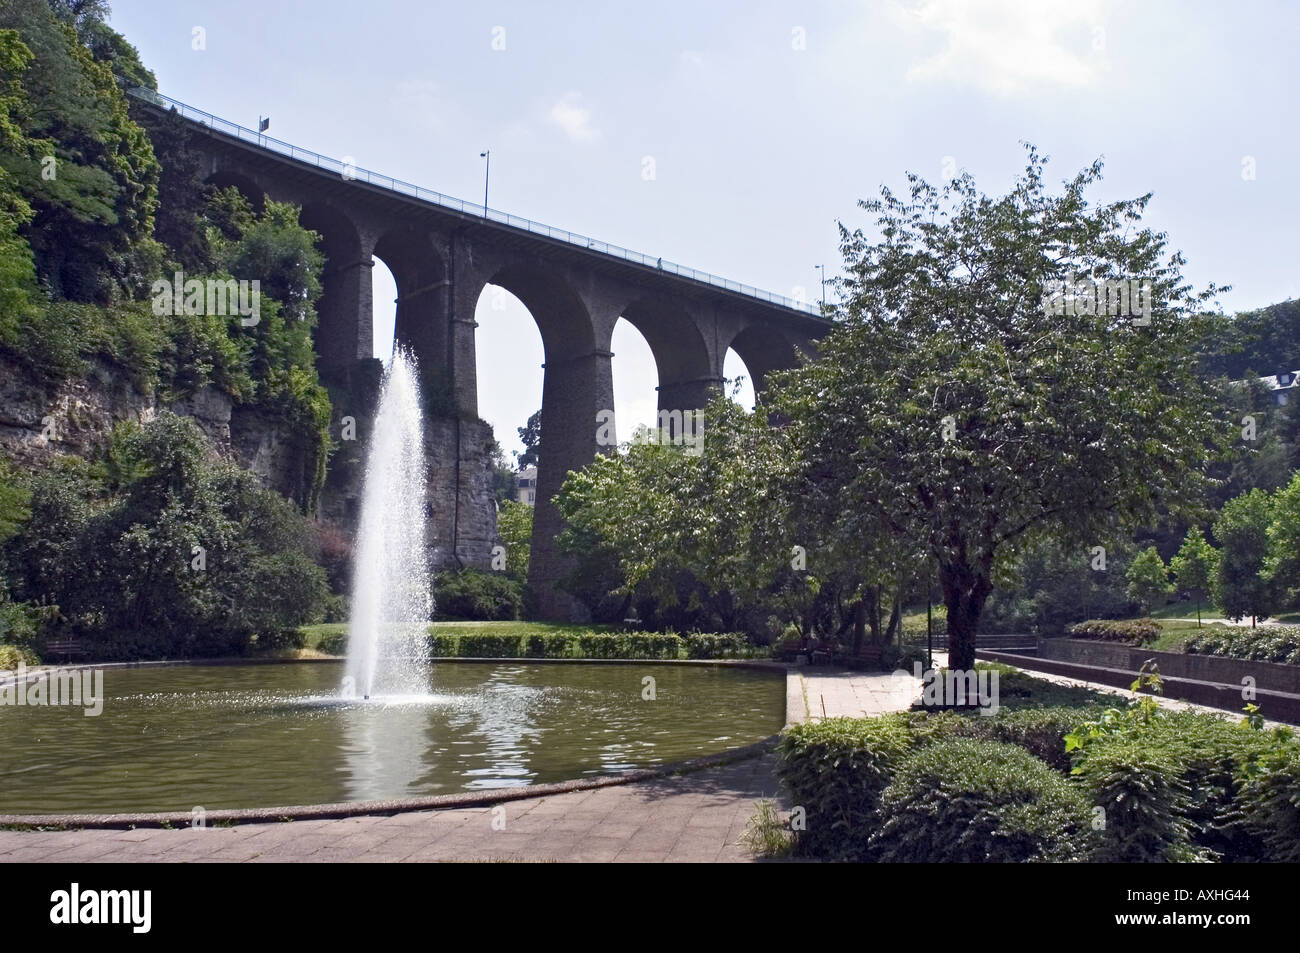 Pétrusse garden and Adolphe bridge in Luxembourg Stock Photo